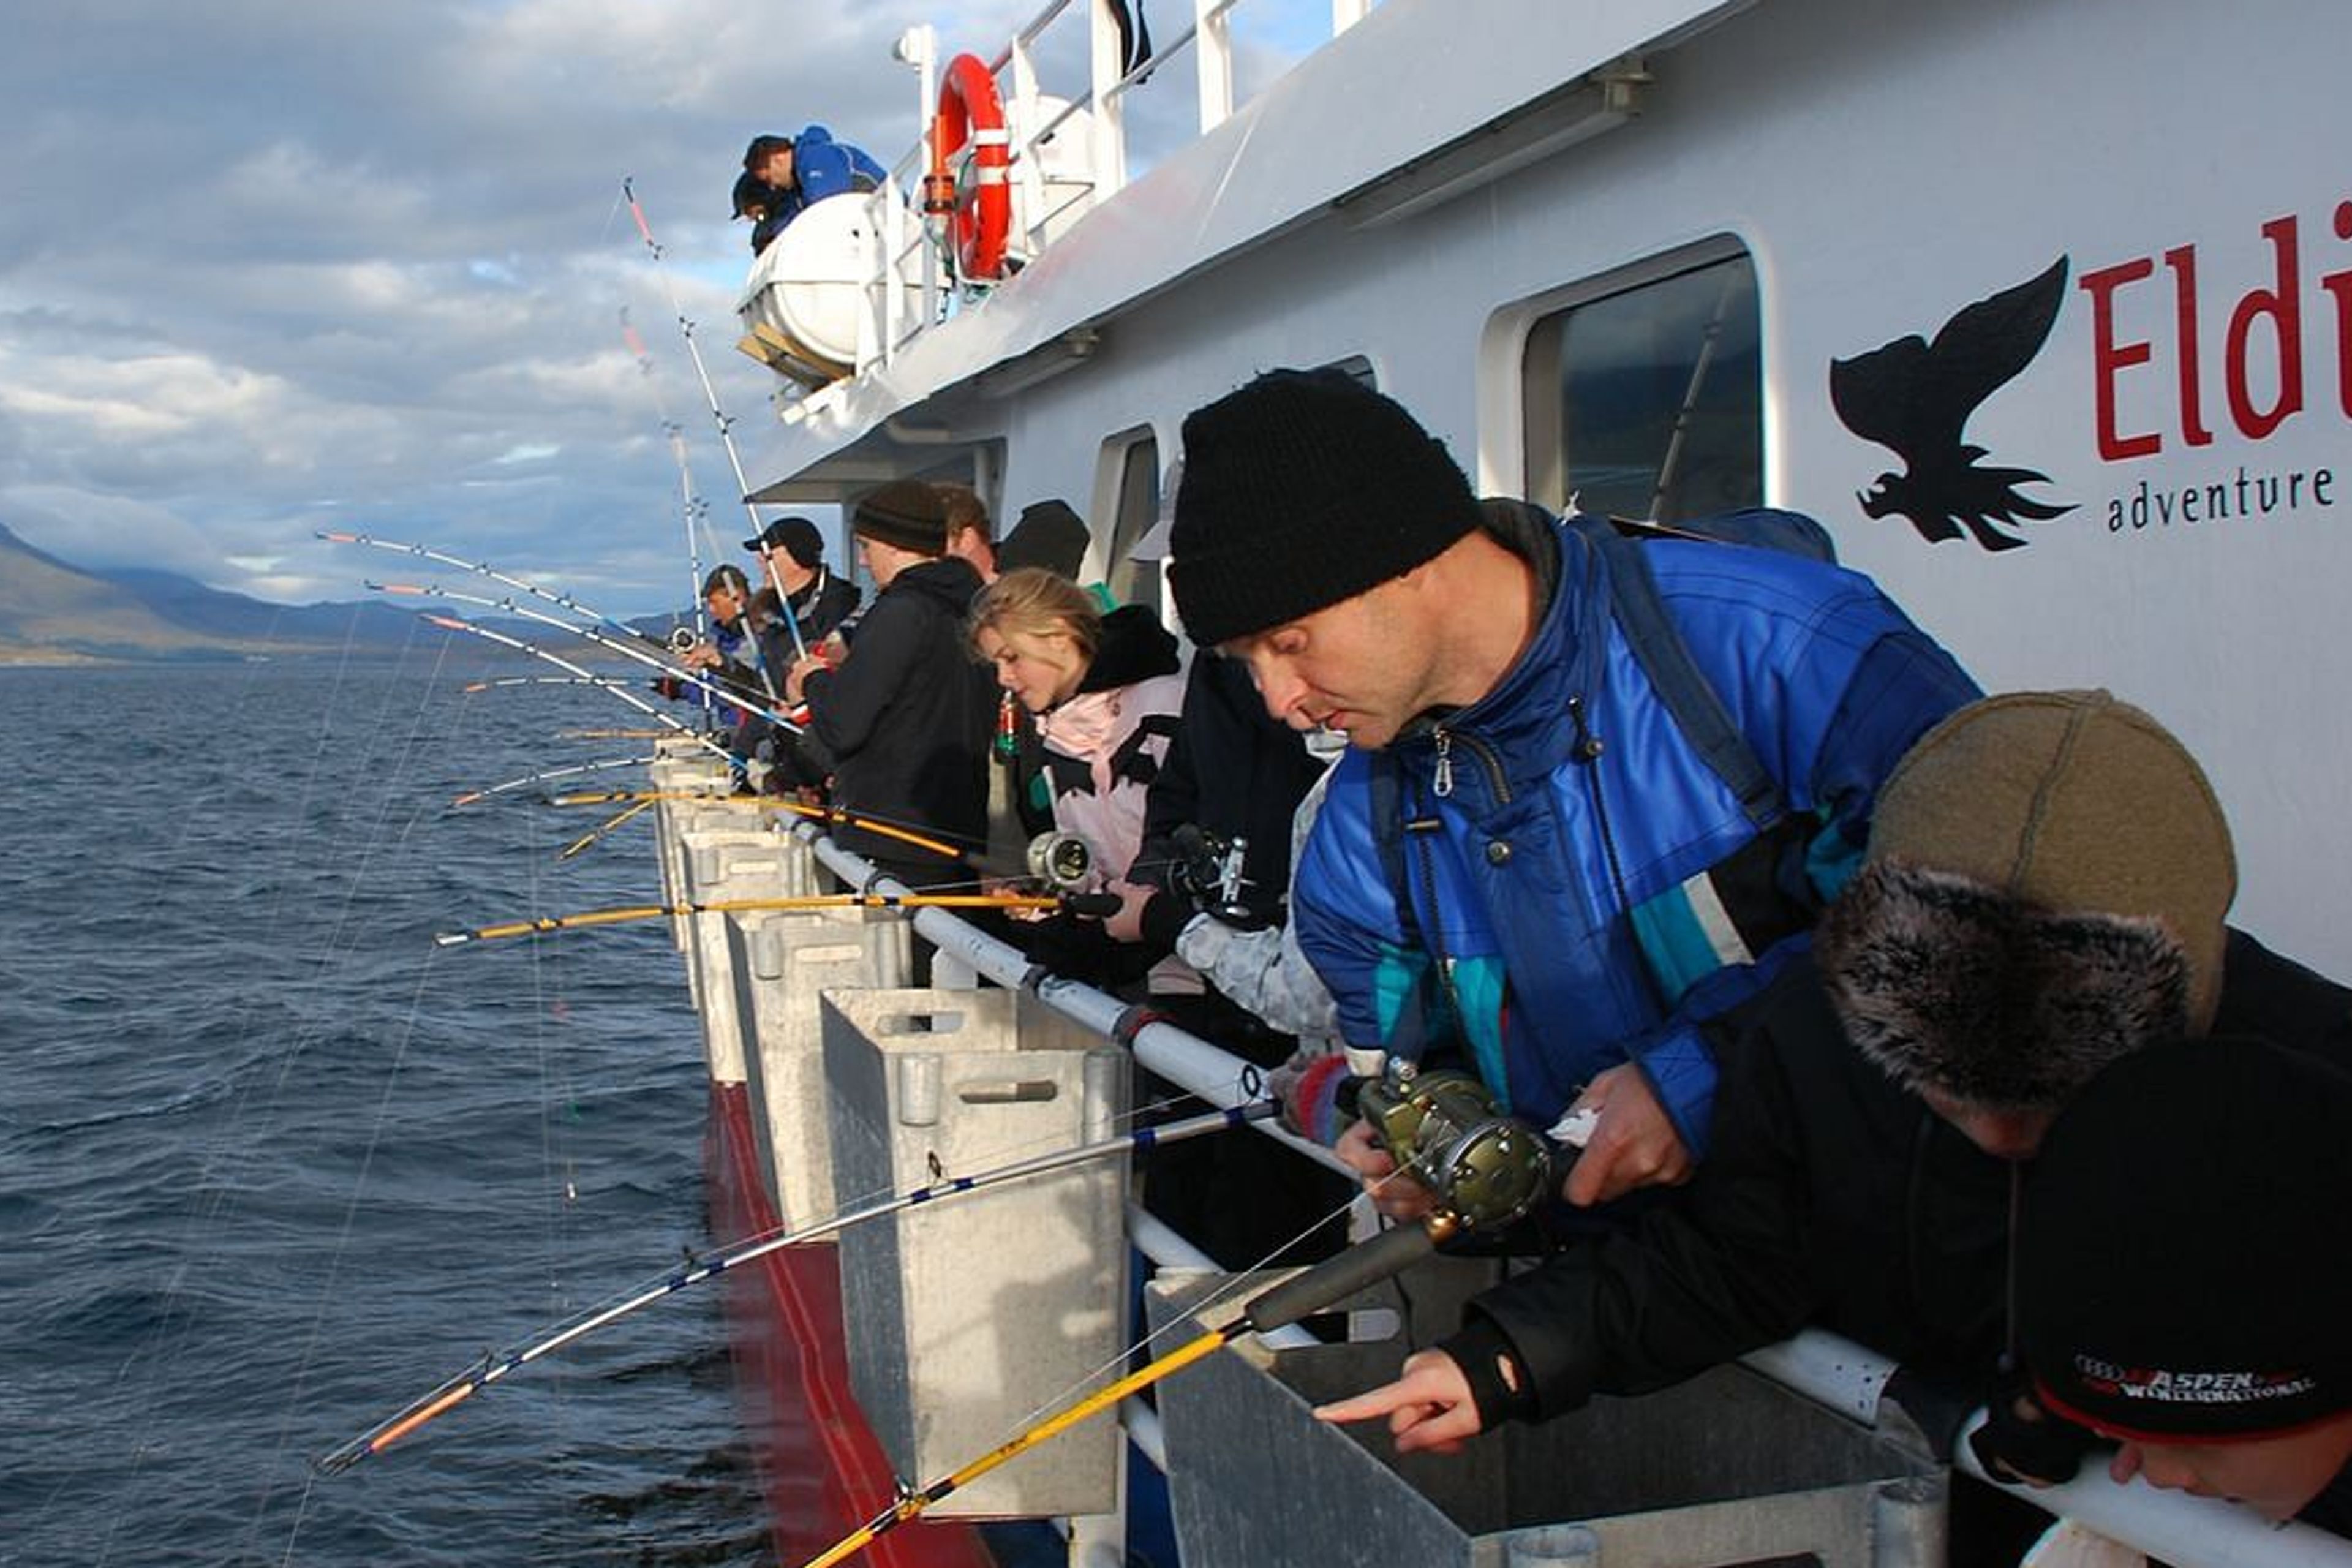 a group of people went out to sea to fish, excursion in Iceland 